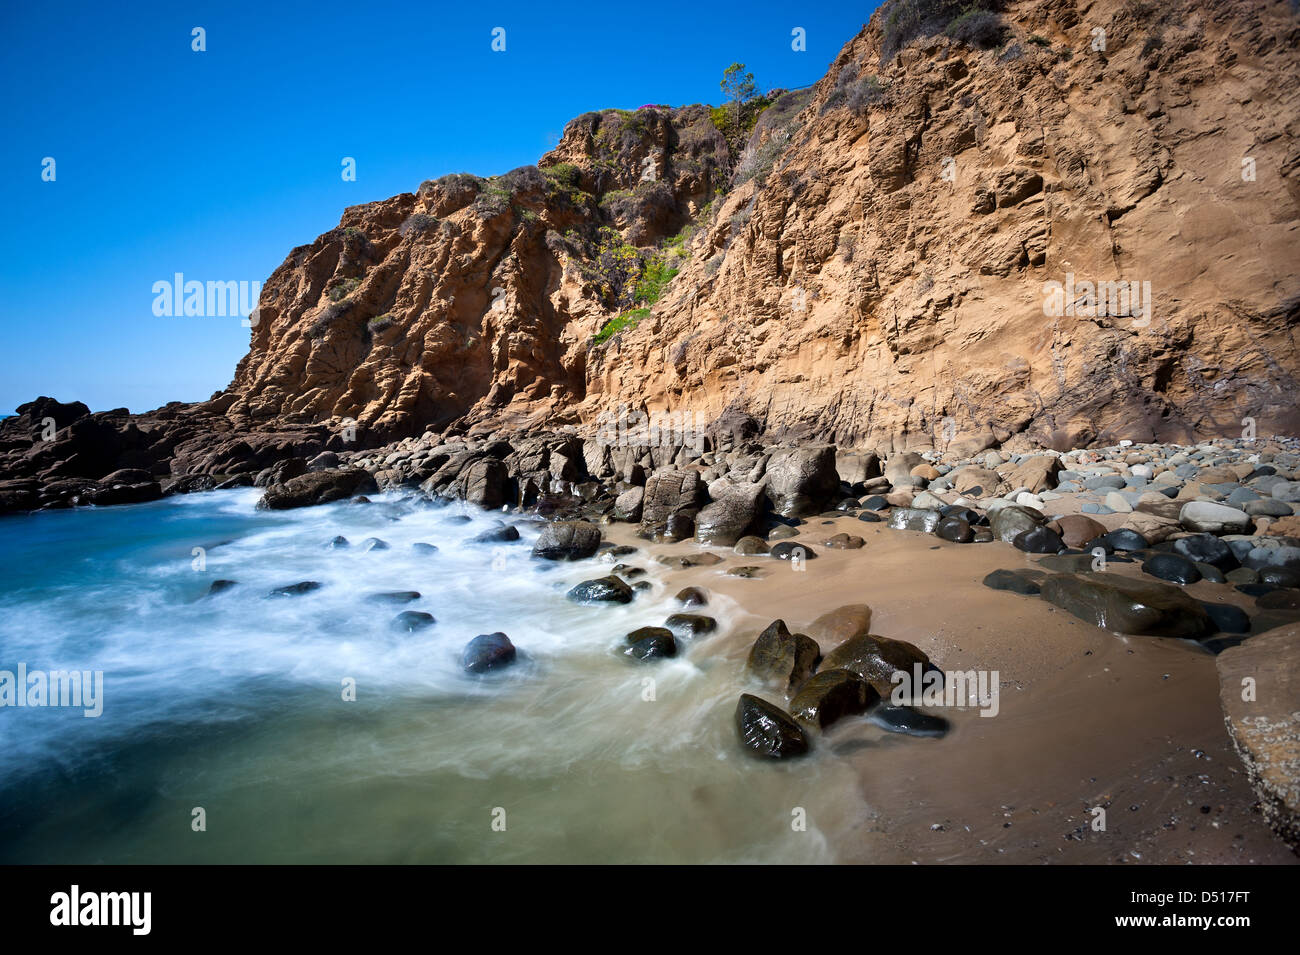 A secluded cover in Laguna Beach, California shows the seawater rushing to shore over smooth boulders. Stock Photo